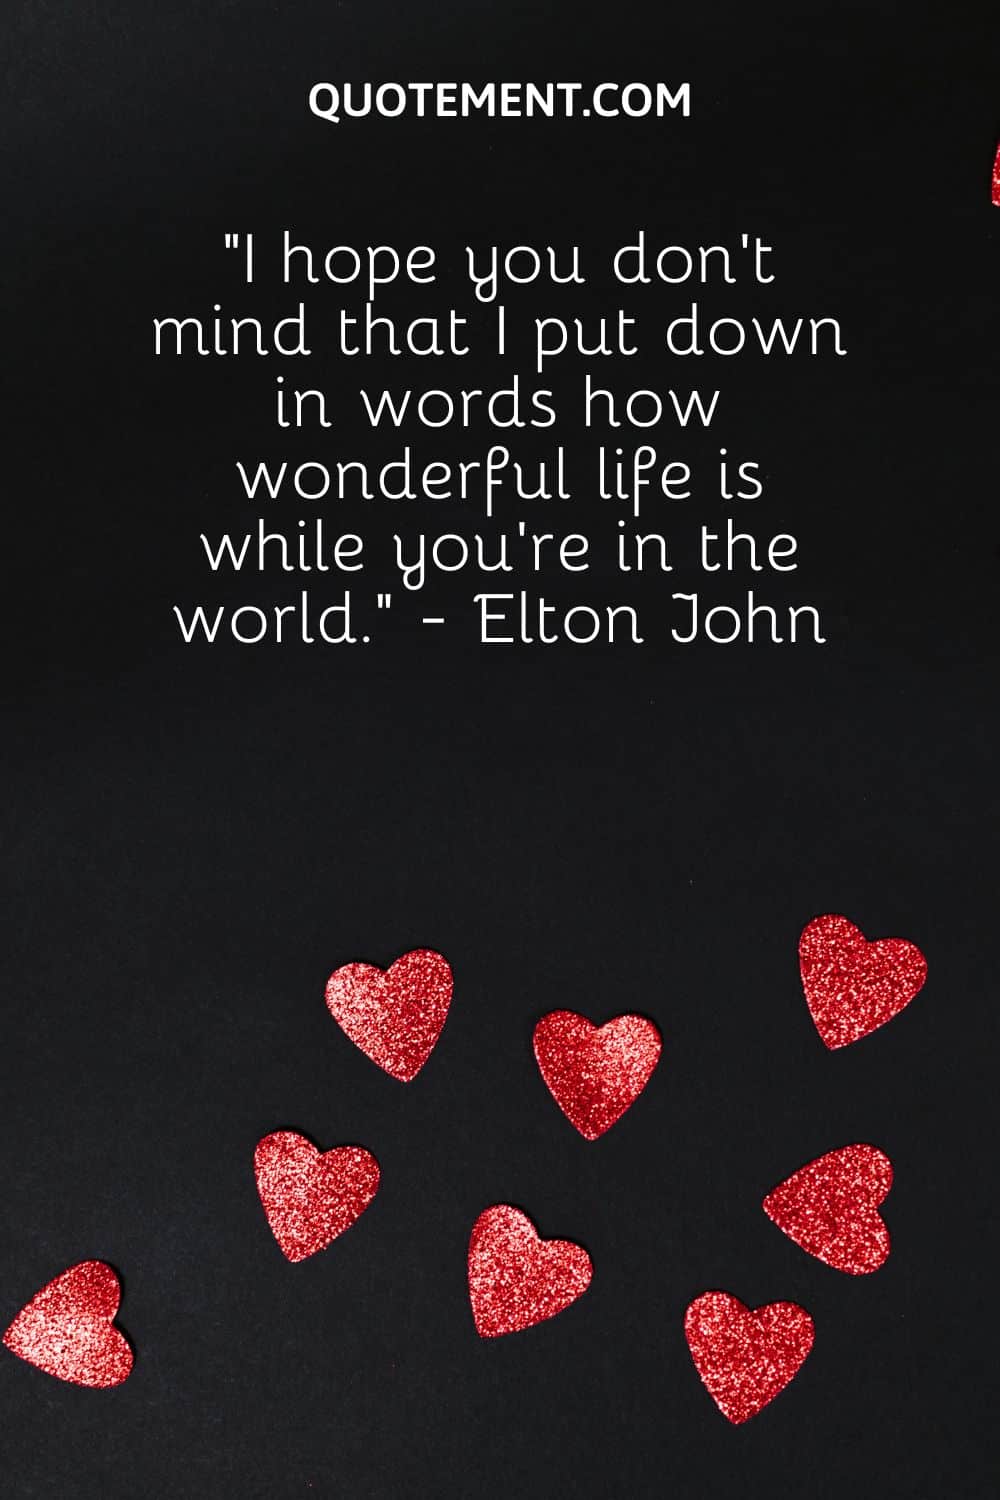 “I hope you don’t mind that I put down in words how wonderful life is while you’re in the world.” - Elton John